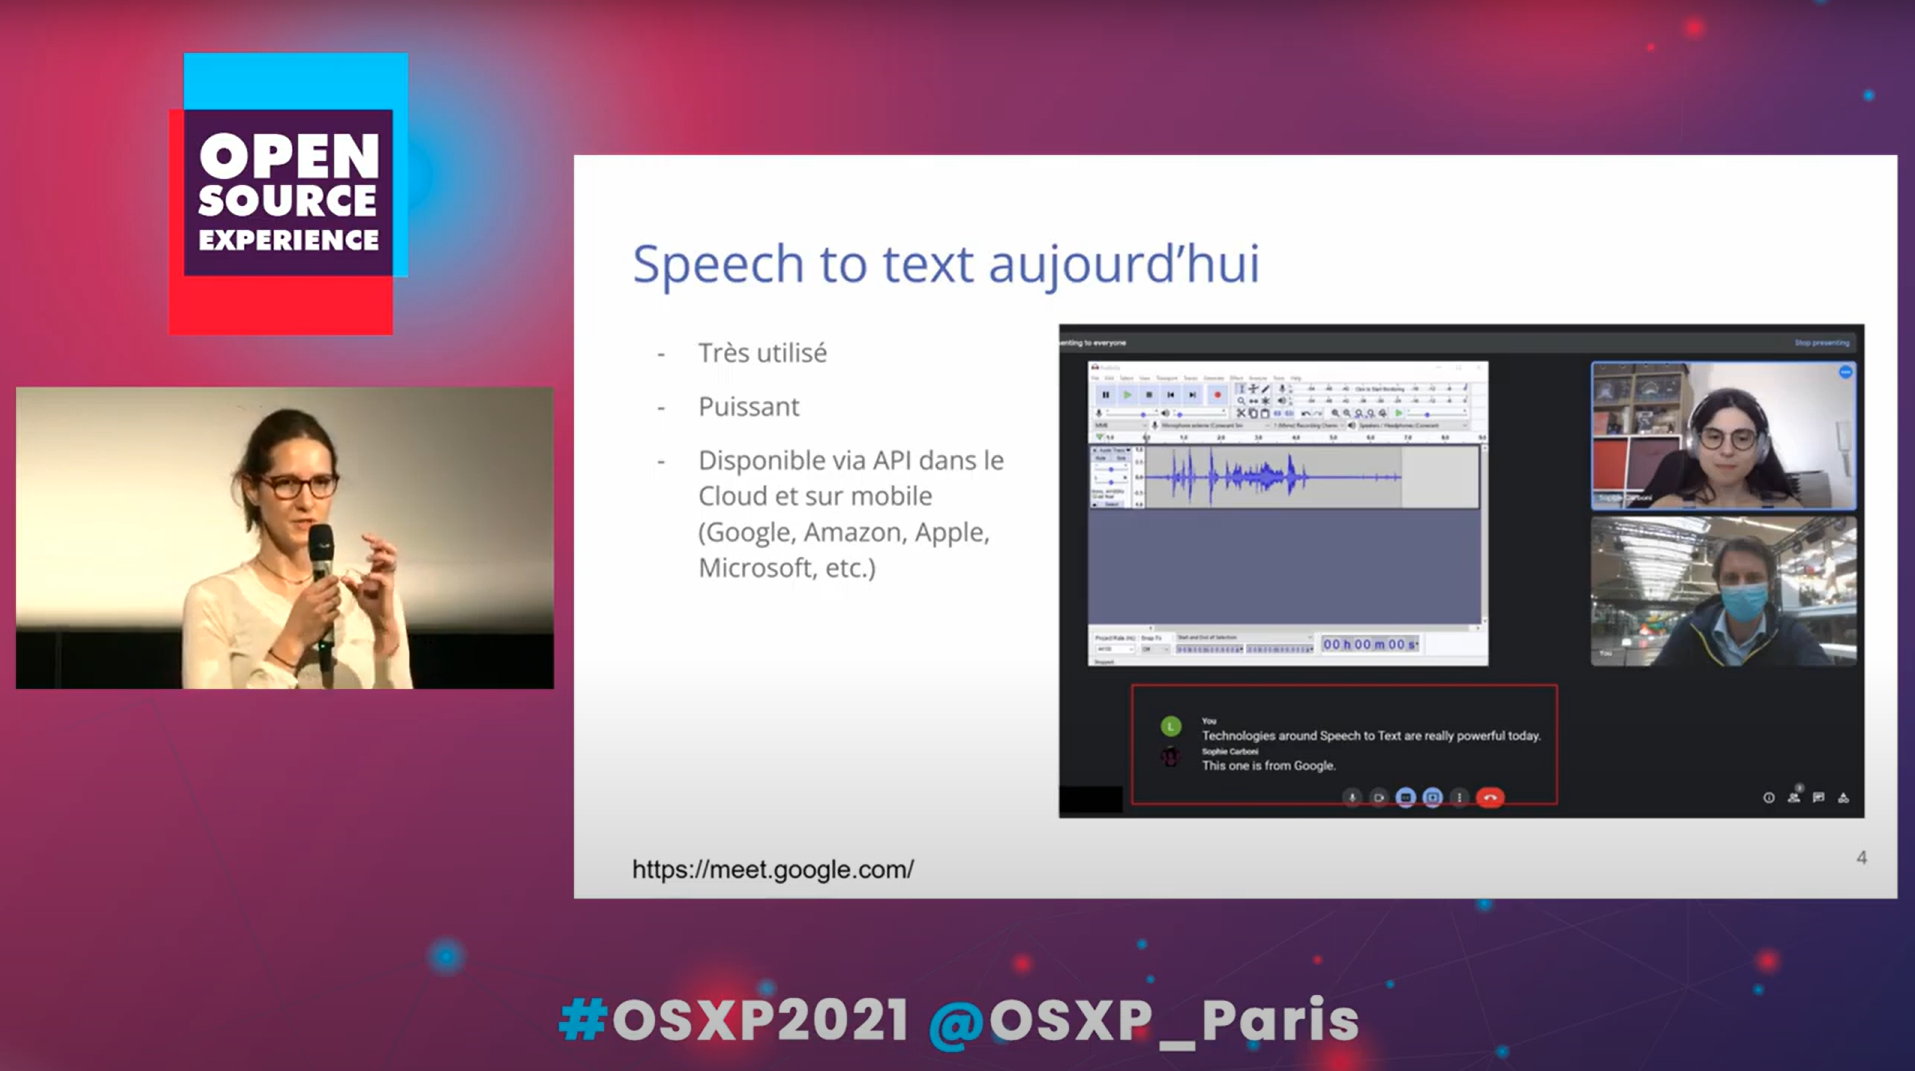 From voice to text, the power of the Open Source ecosystem - return on the OSXP conference